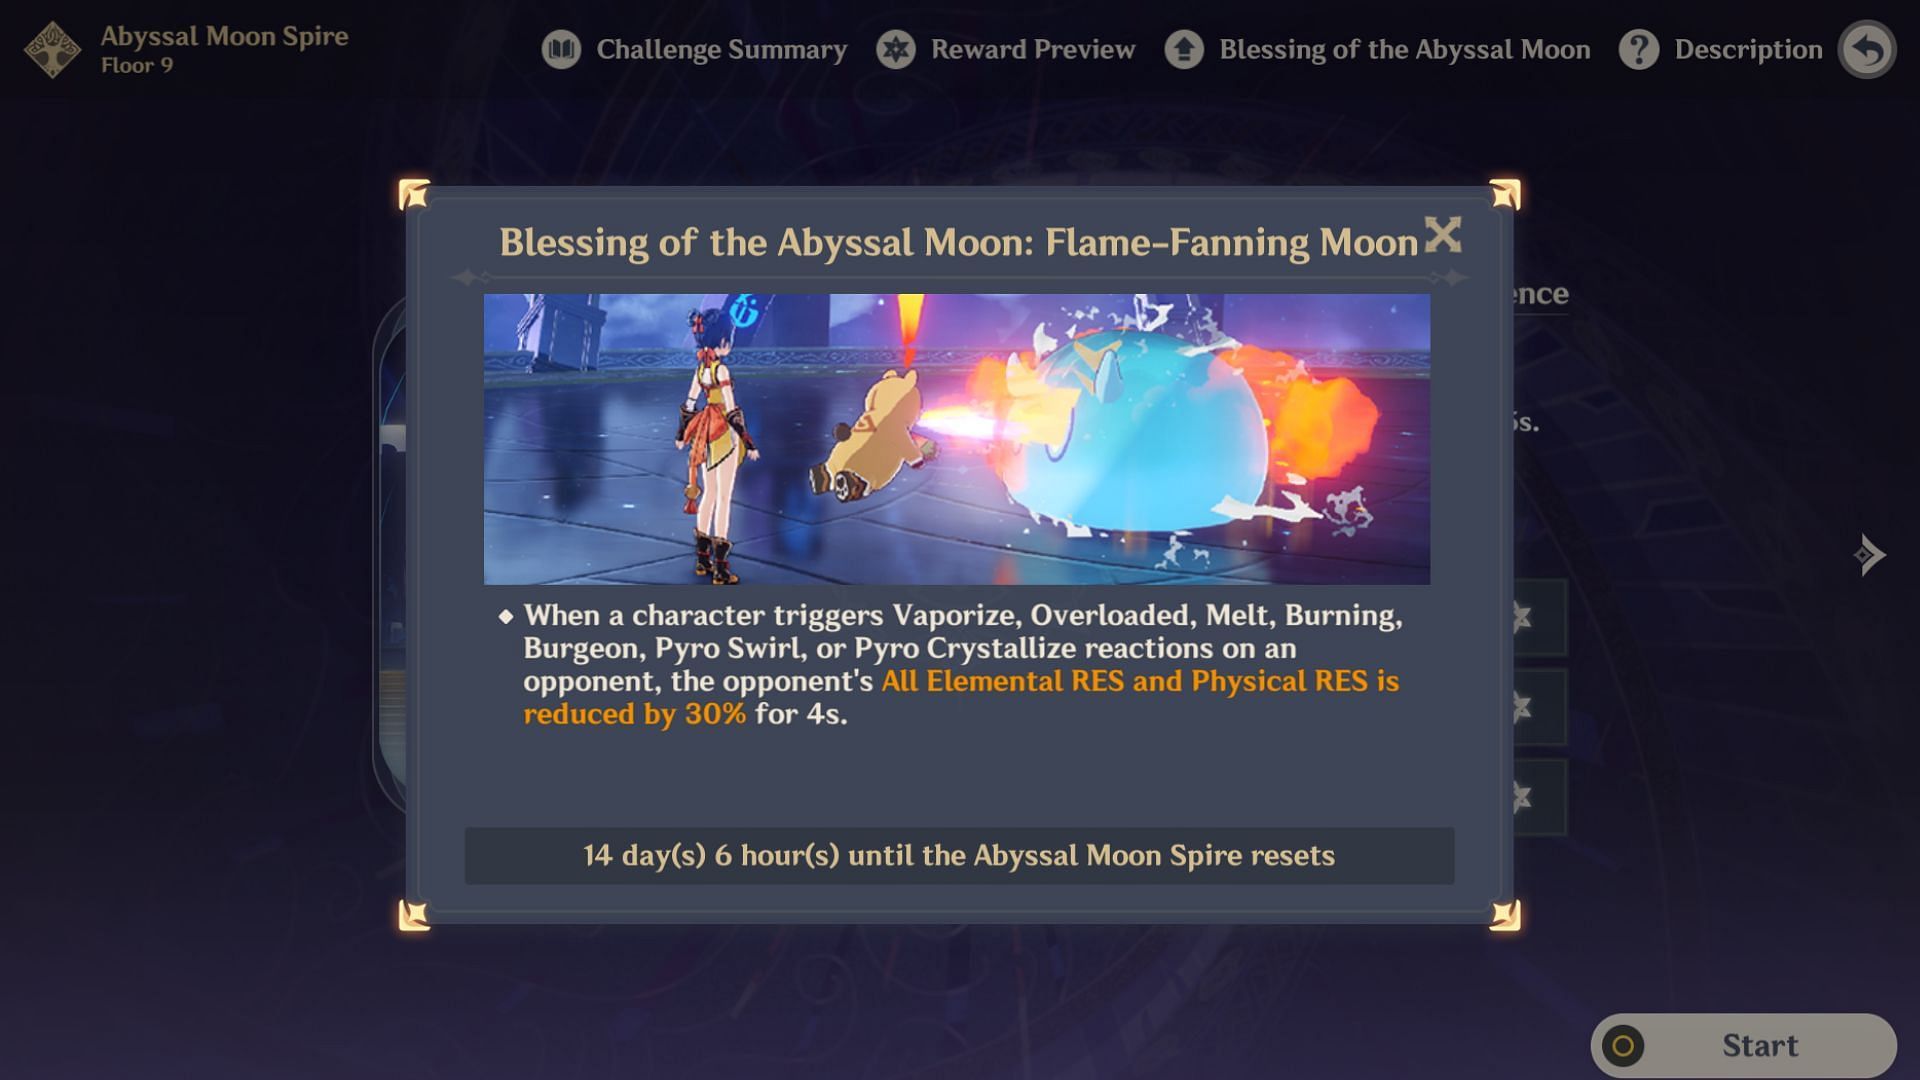 Blessing of the Abyssal Moon for 4.6 Spiral Abyss (Image via HoYoverse)